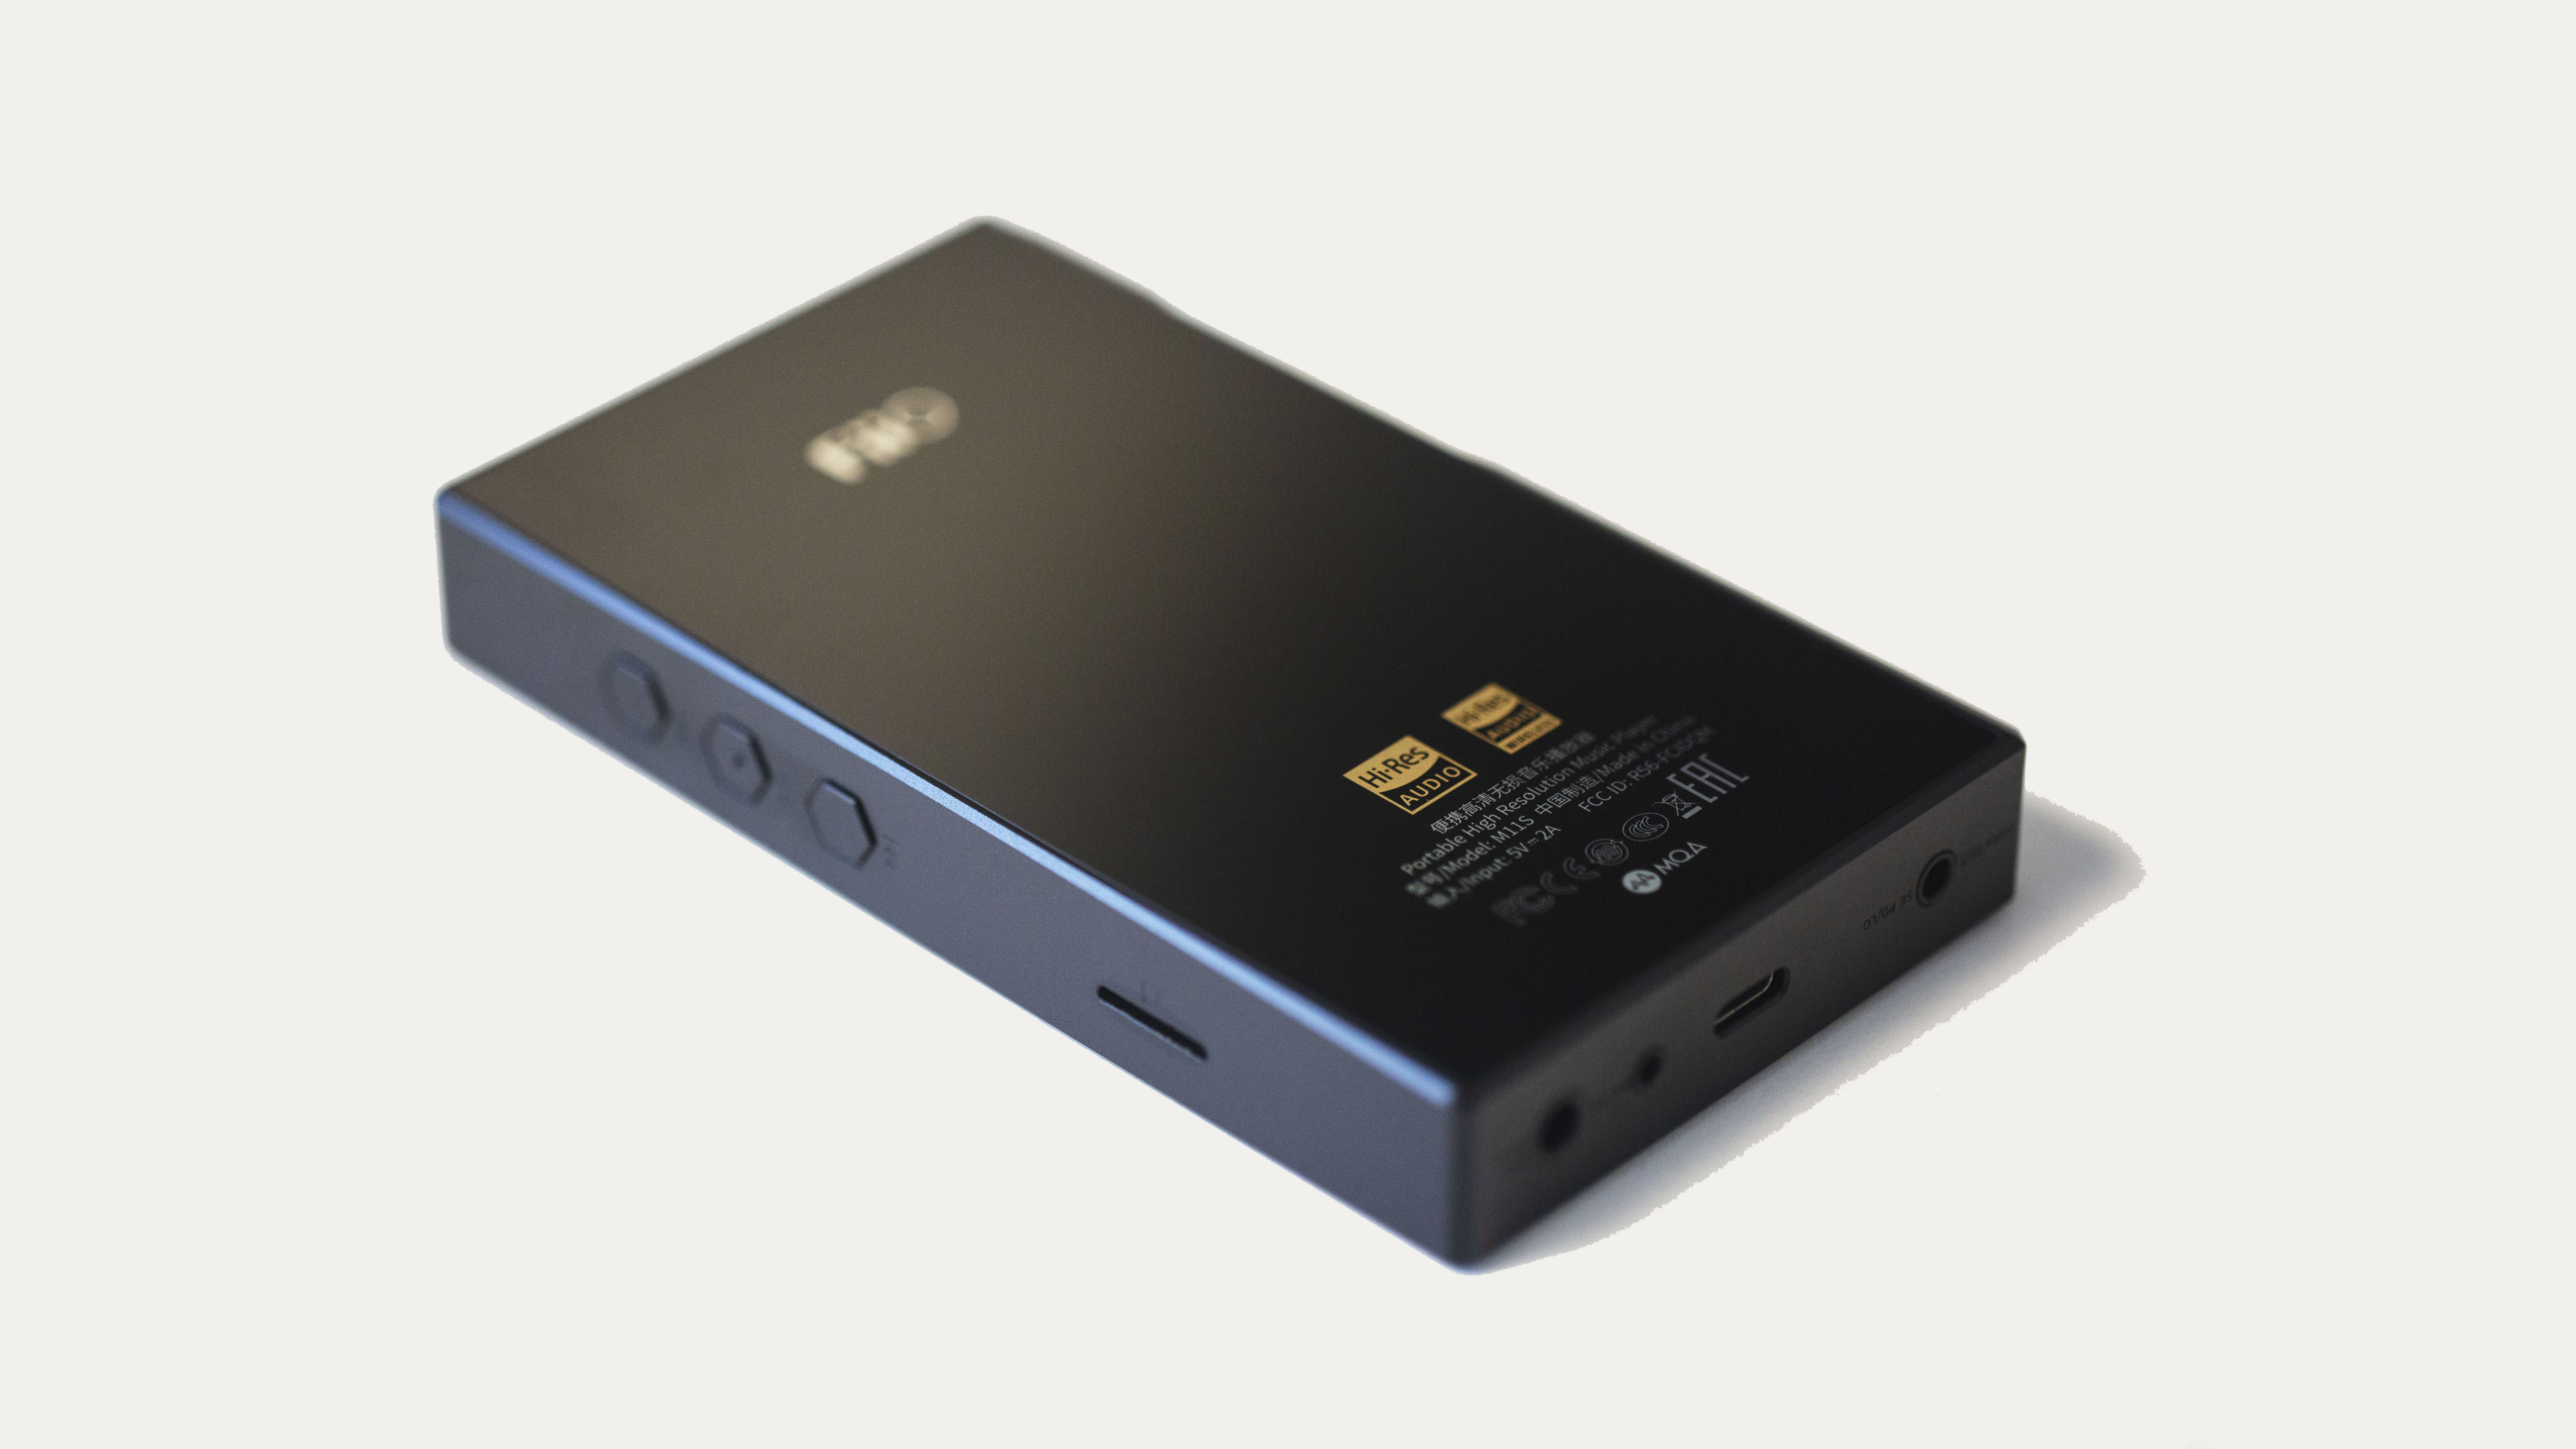 The rear of the FiiO M11S music player